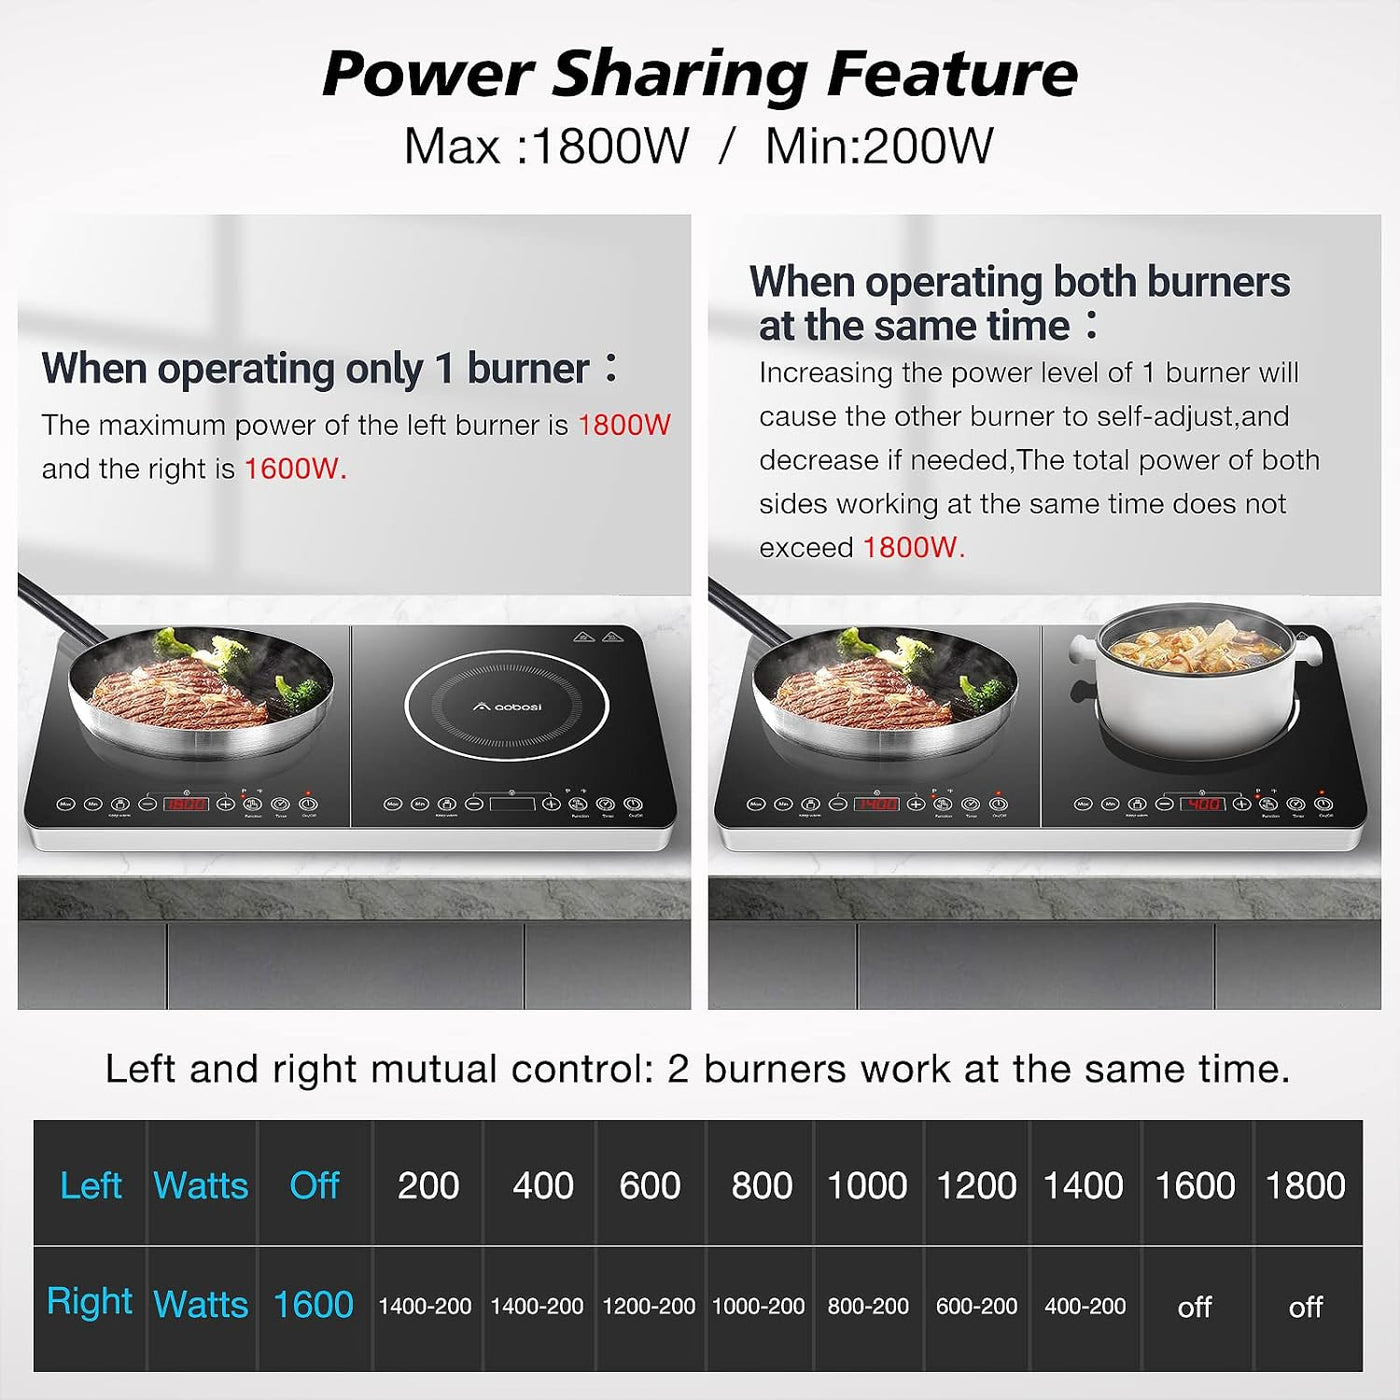    Aaobosi 1800W portable double induction cooktop with 9 power setting and 10 temperature levels setting